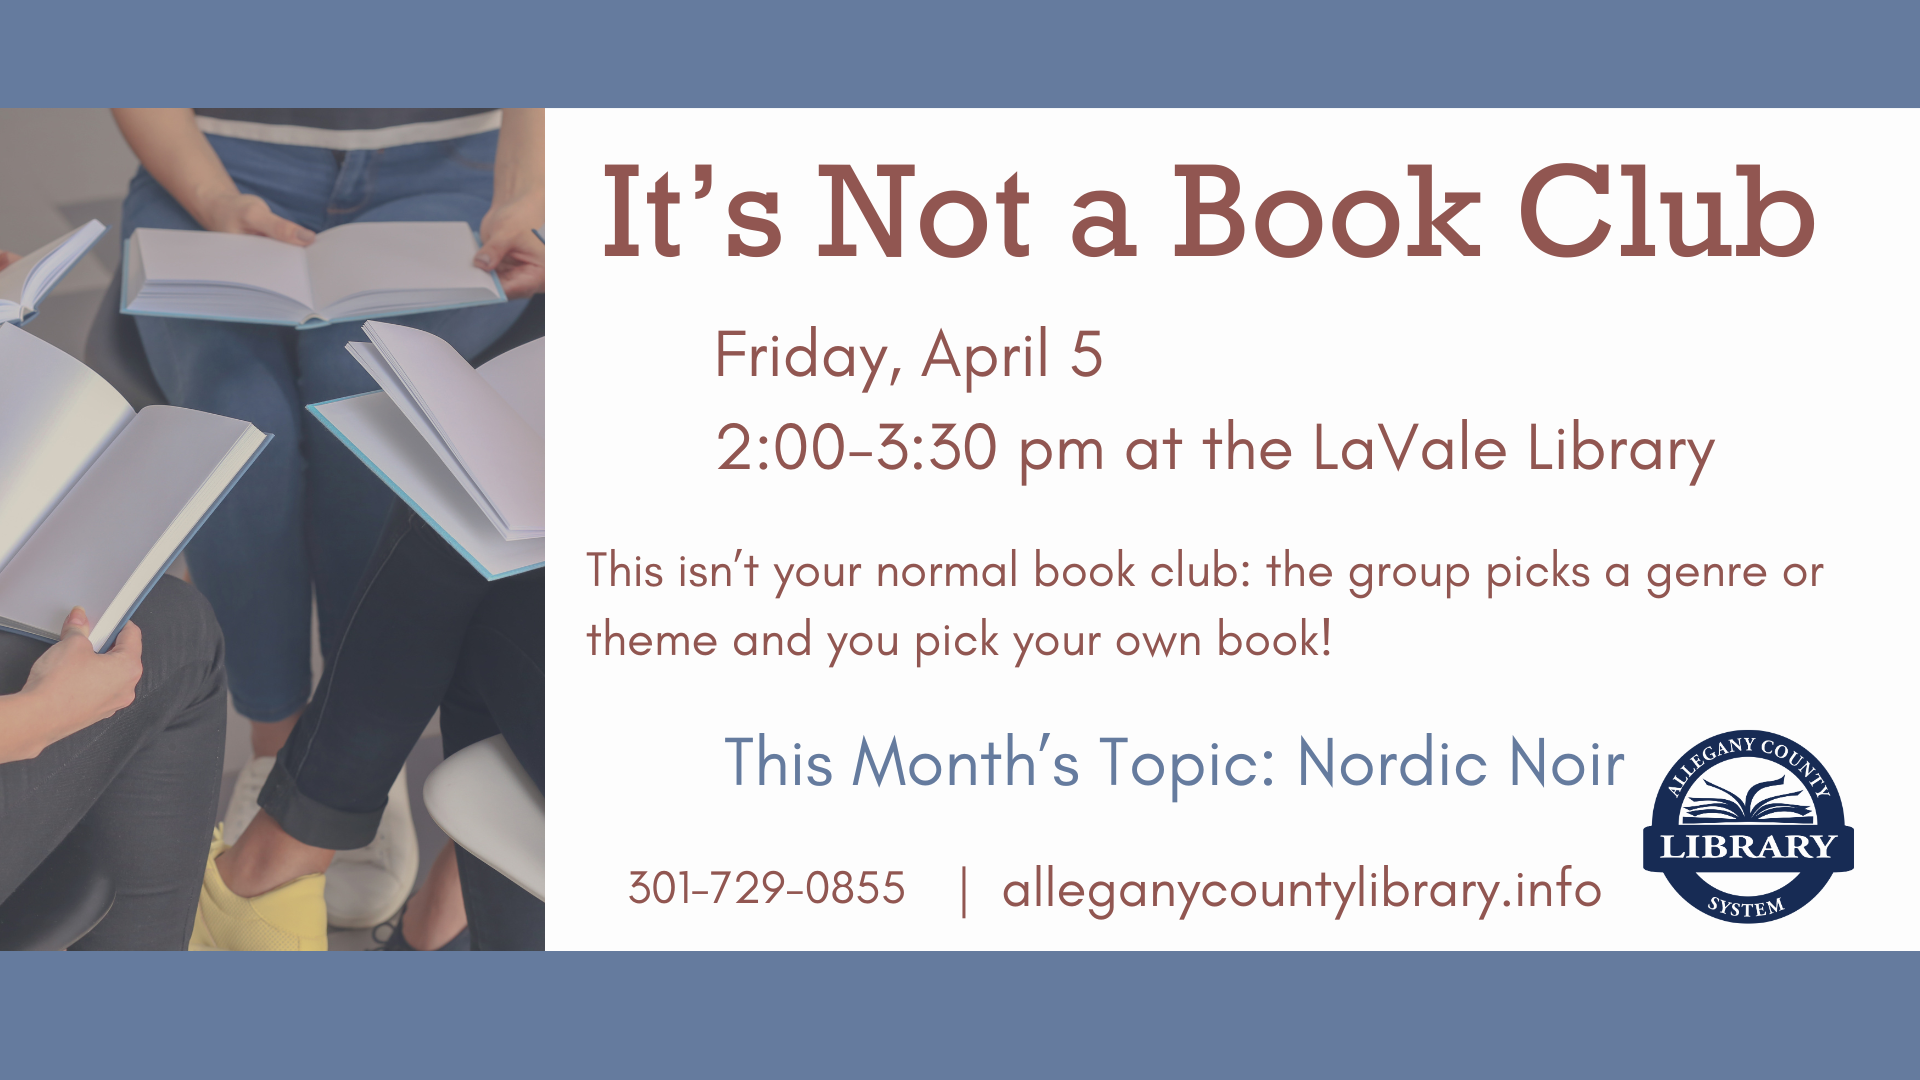 It's Not A Book Club event details with photo of hands holding books in a circle